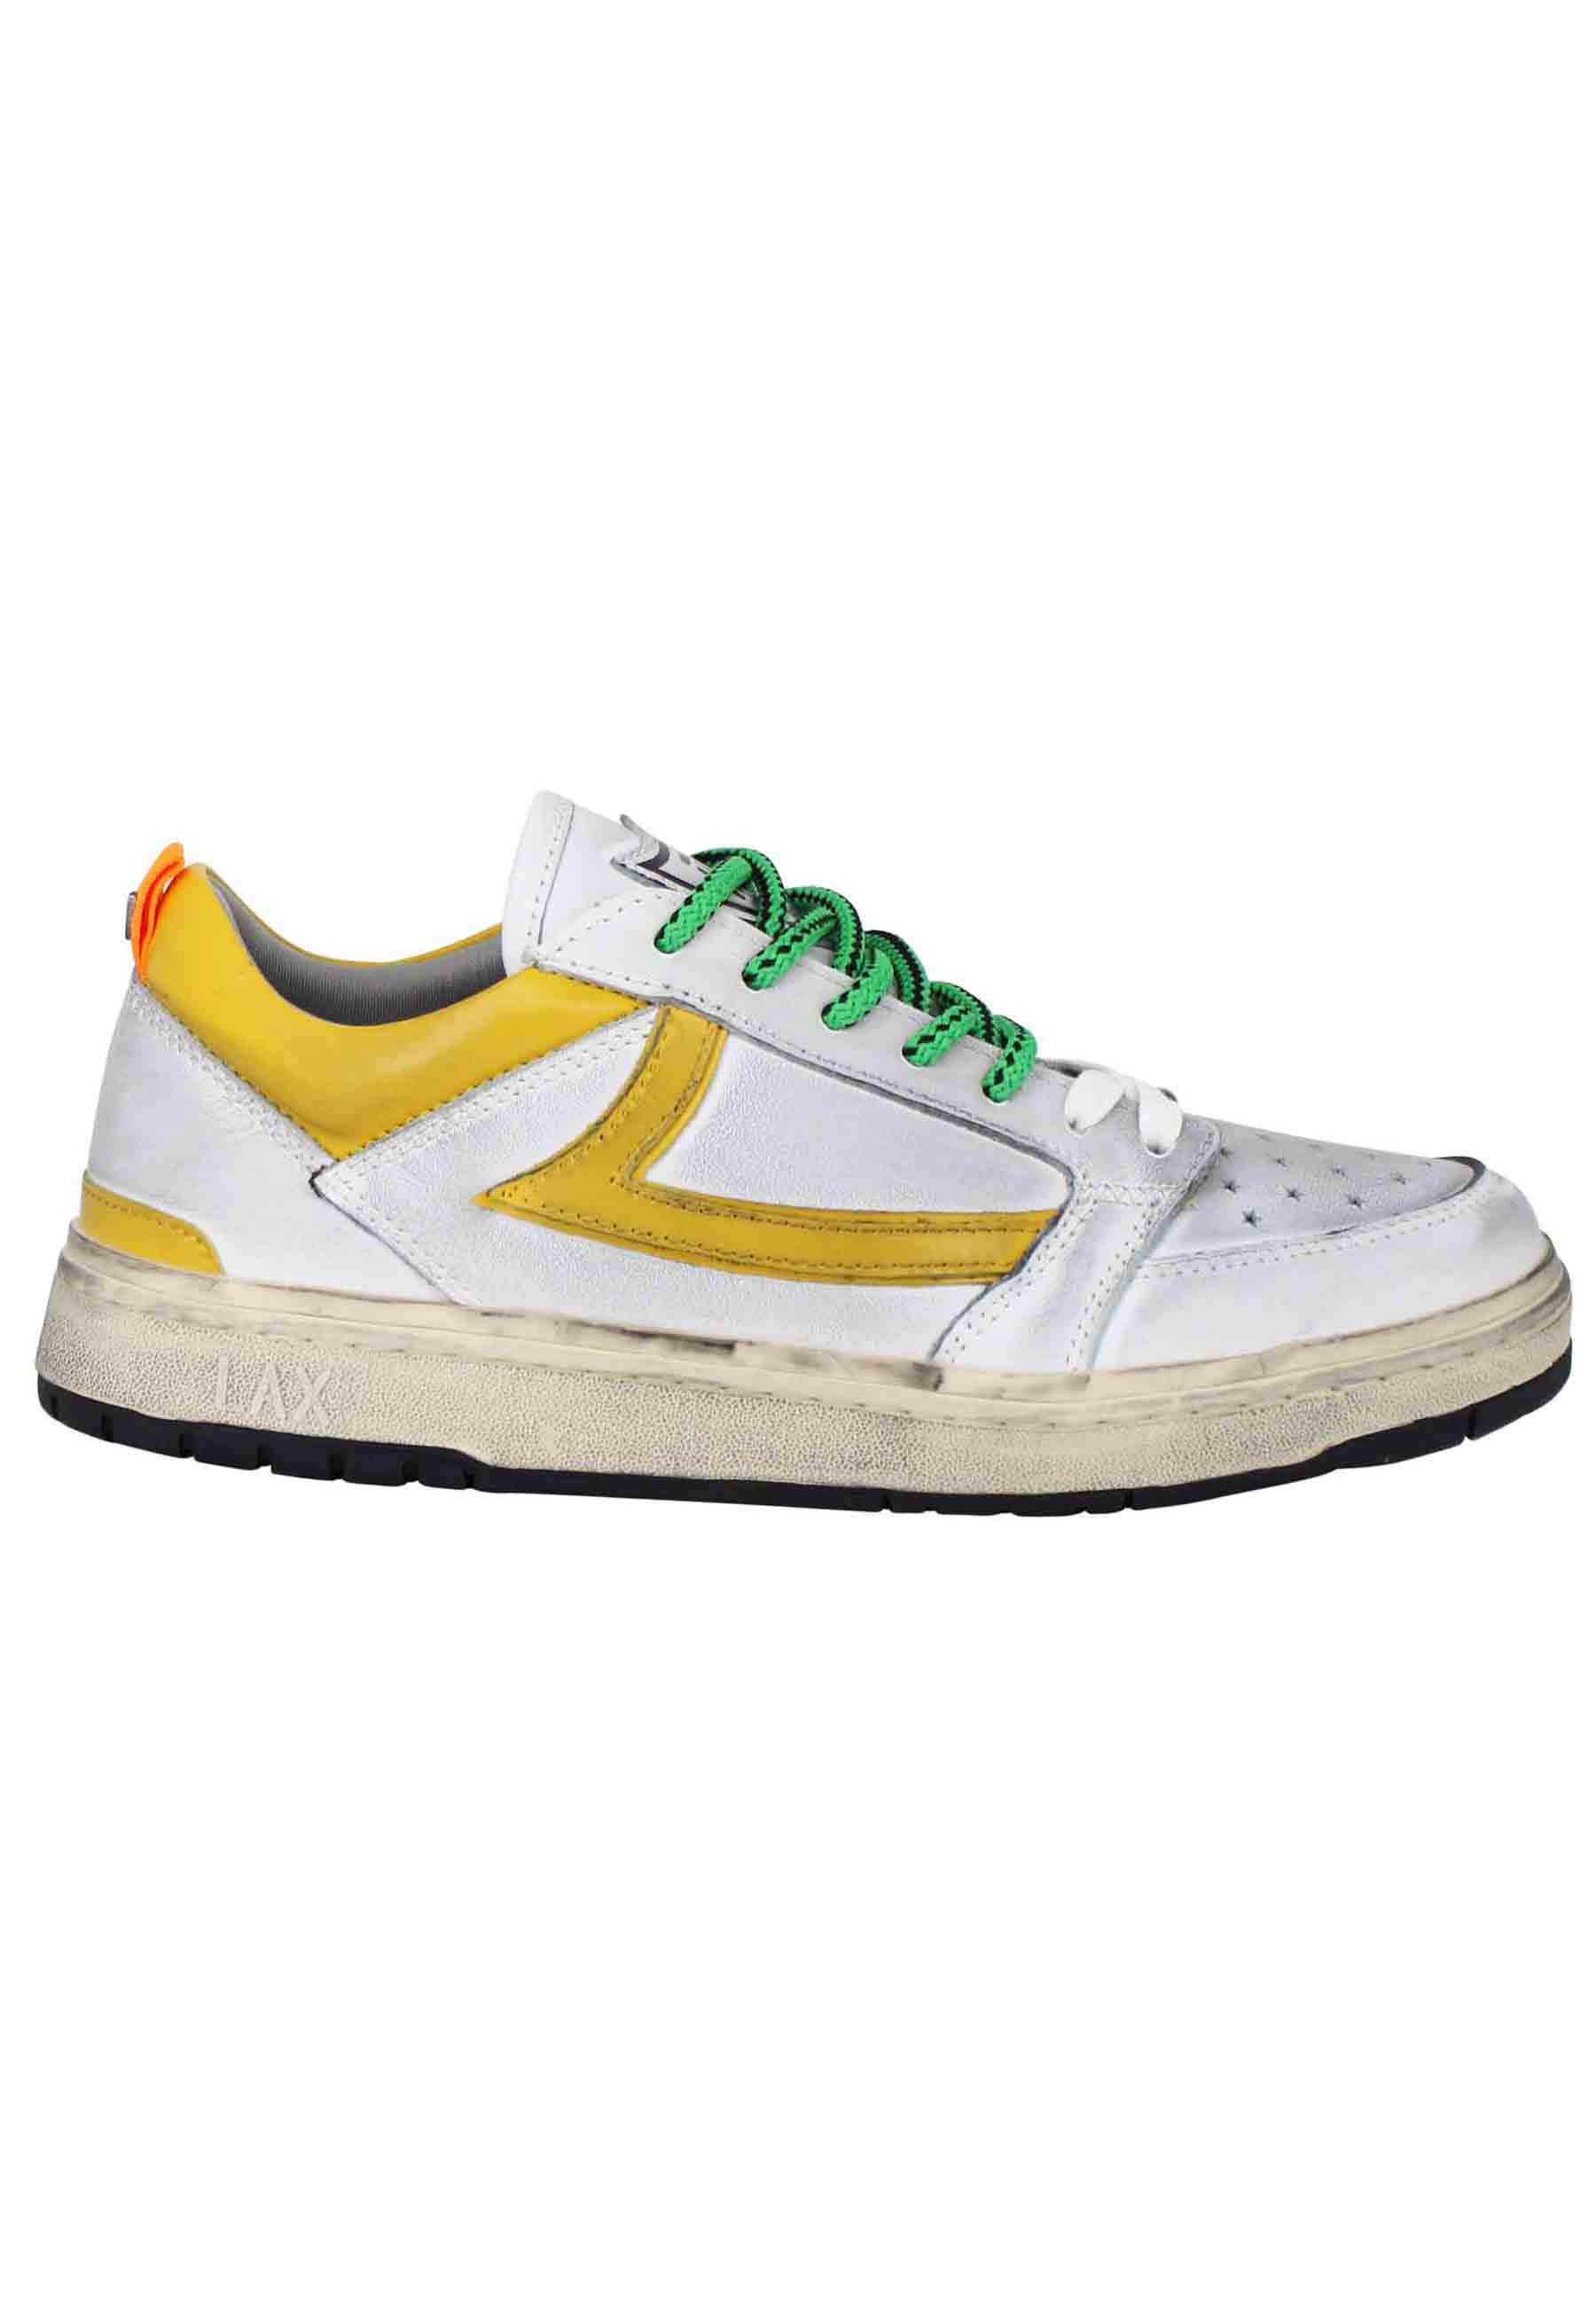 Starlight Vintage men's sneakers in white leather with yellow leather inserts